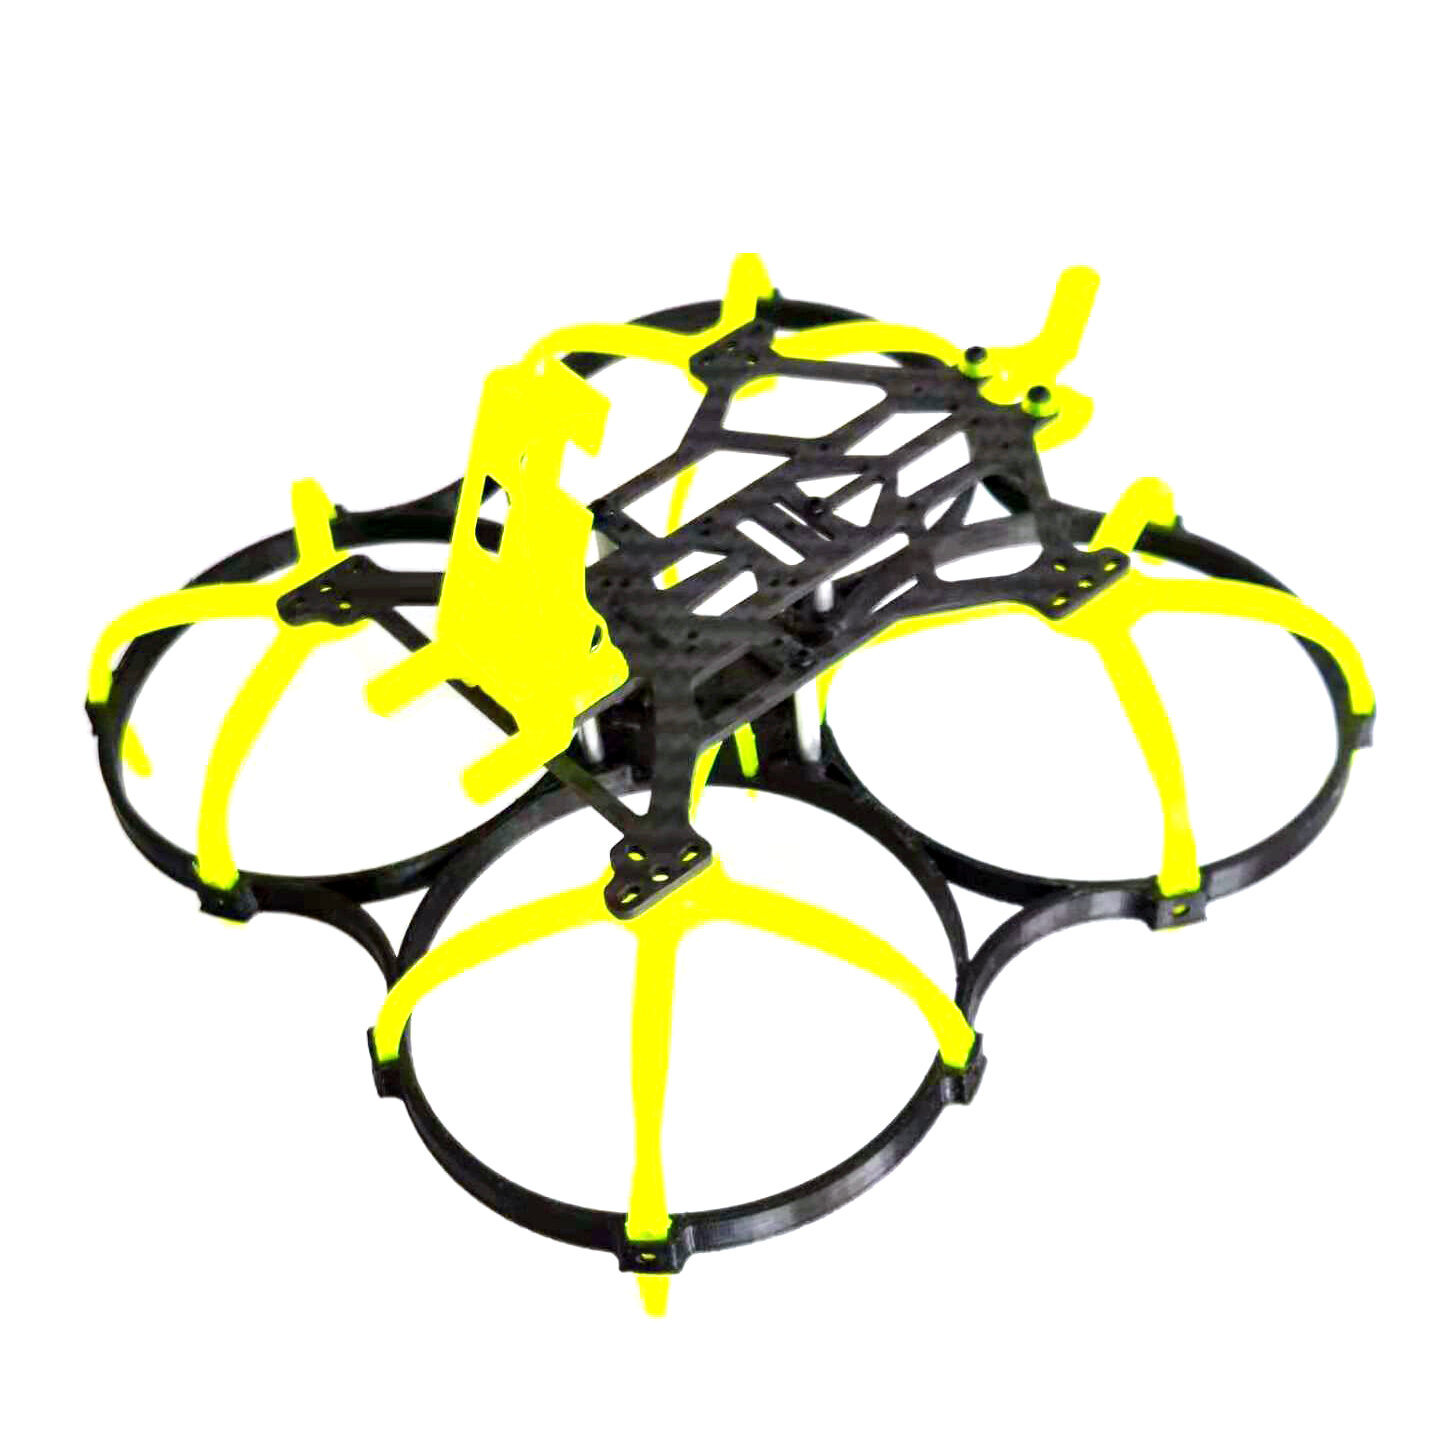 Velociraptor 110x 3 Inch 110mm Wheelbase 2mm Arm TPU Carbon Fiber Frame Kit Whoop for RC Drone FPV Racing